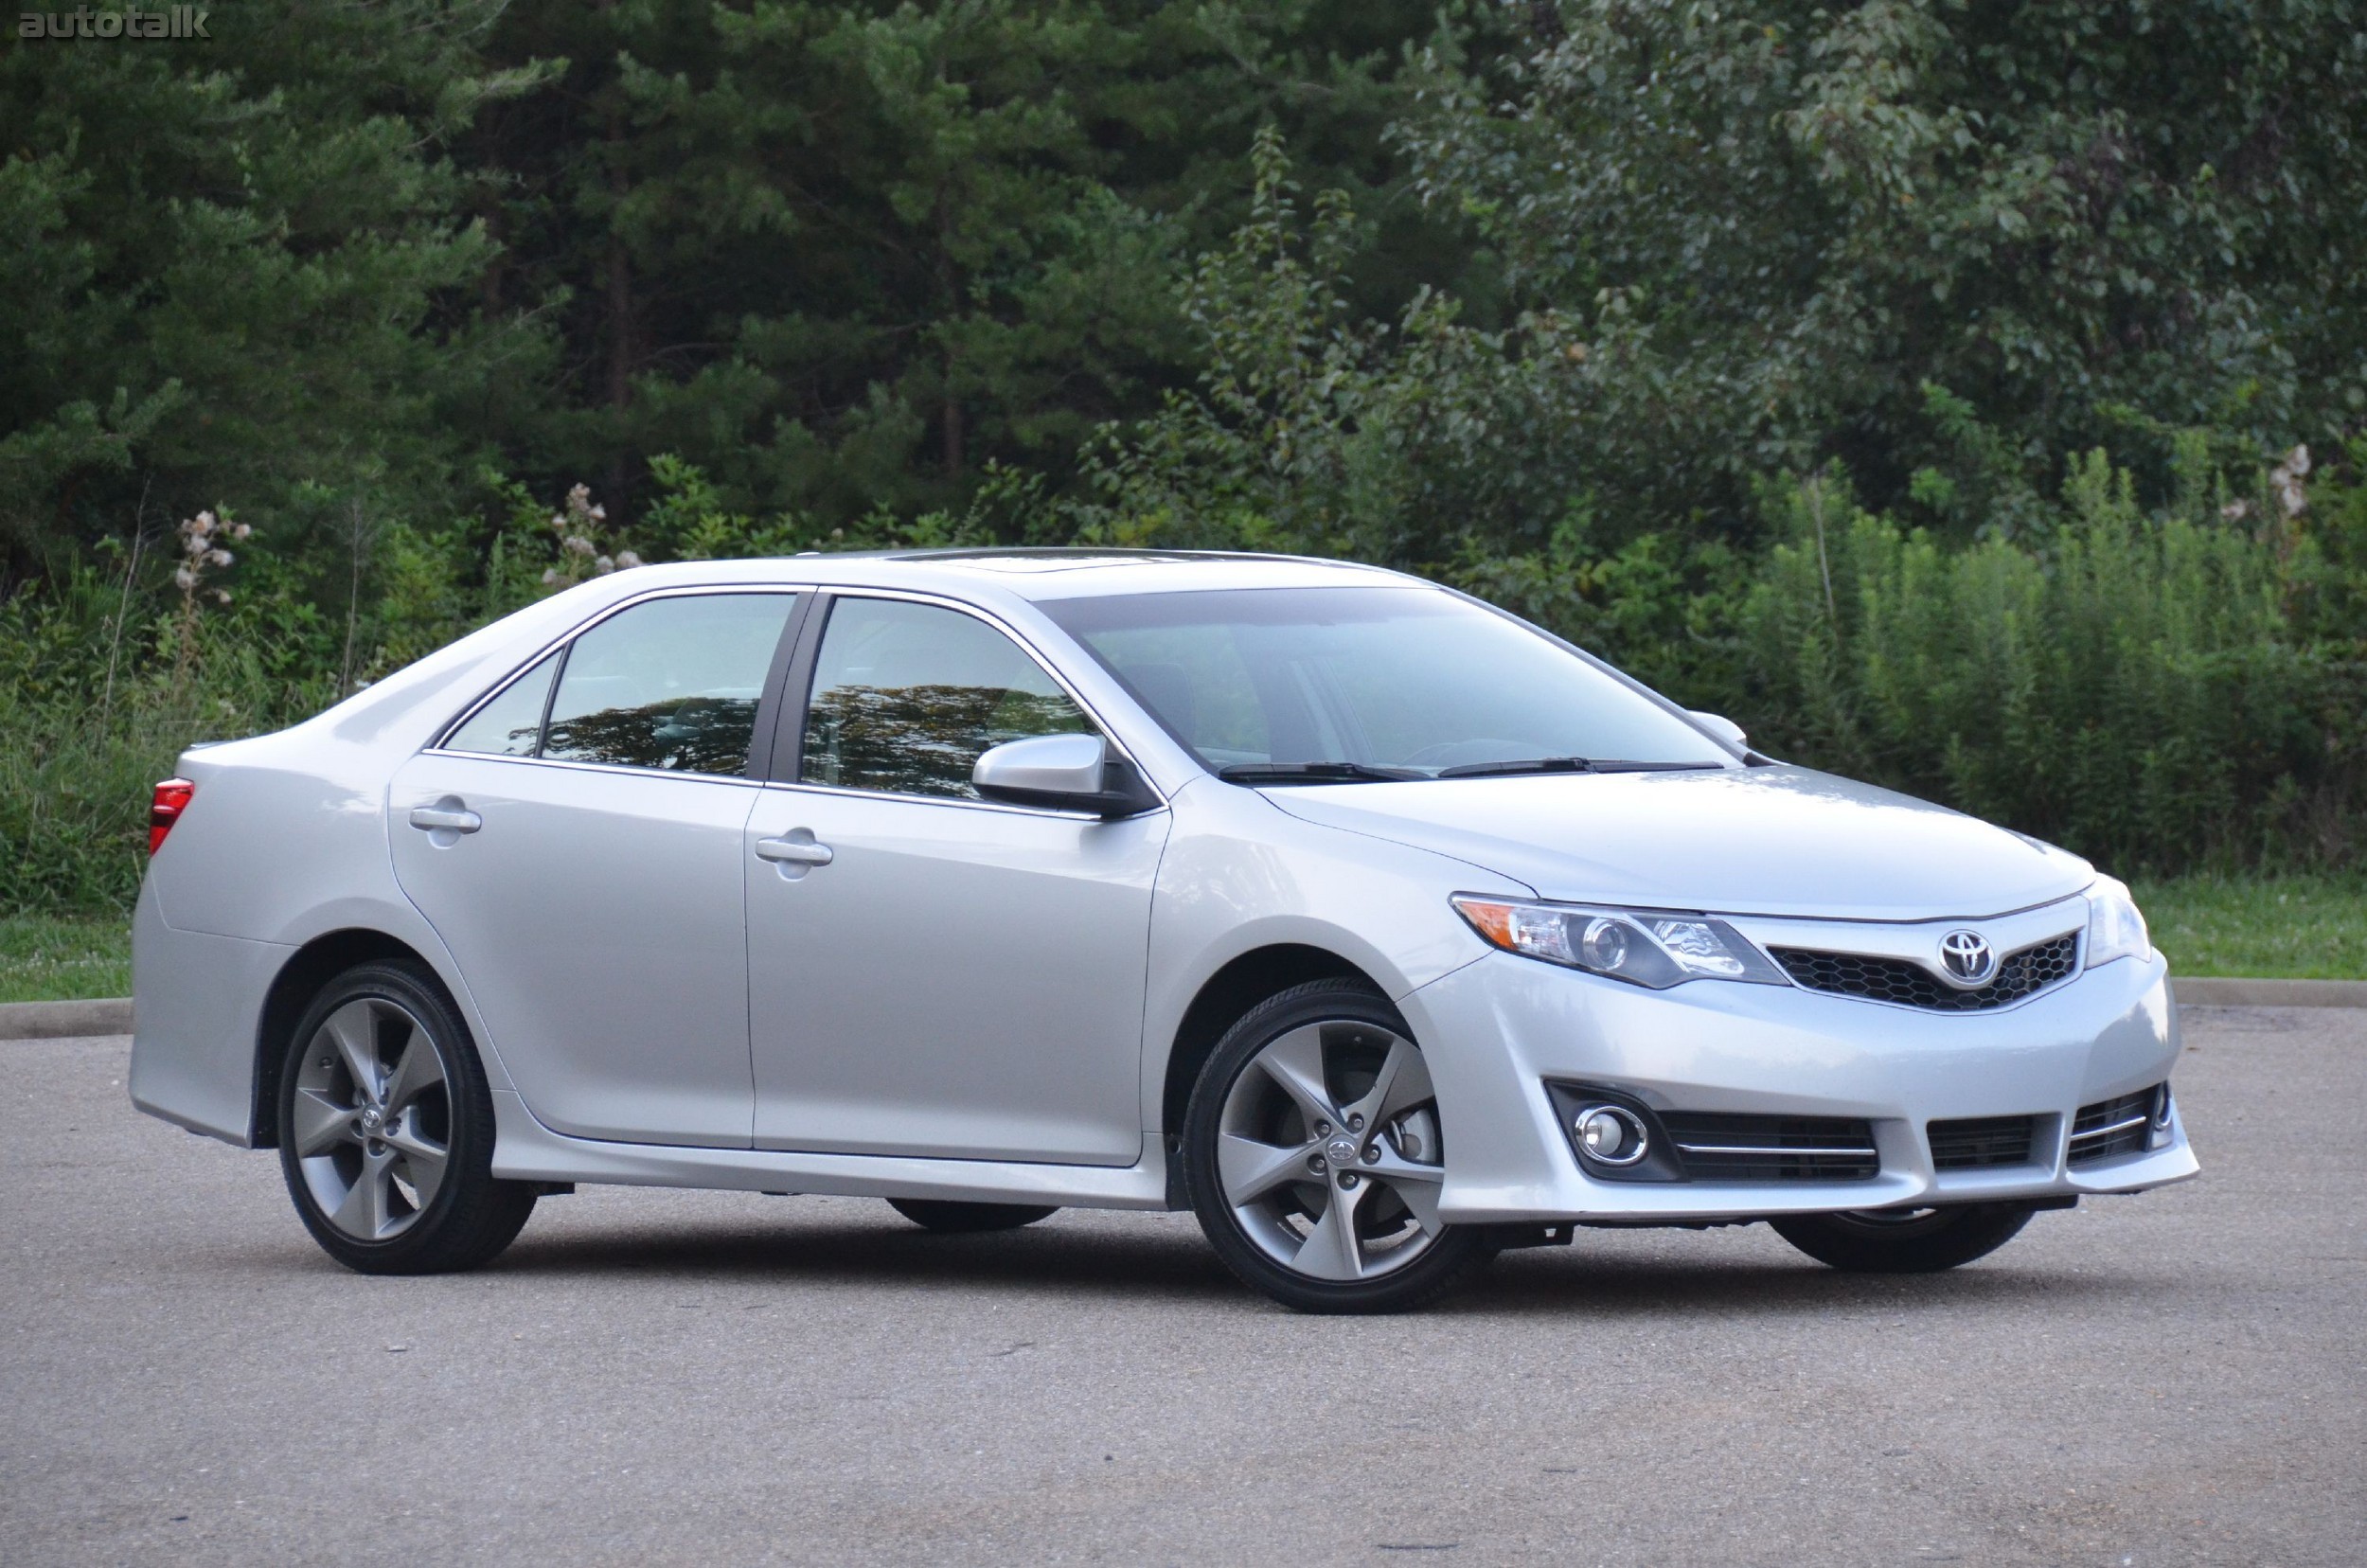 2012 Toyota Camry Review • AutoTalk